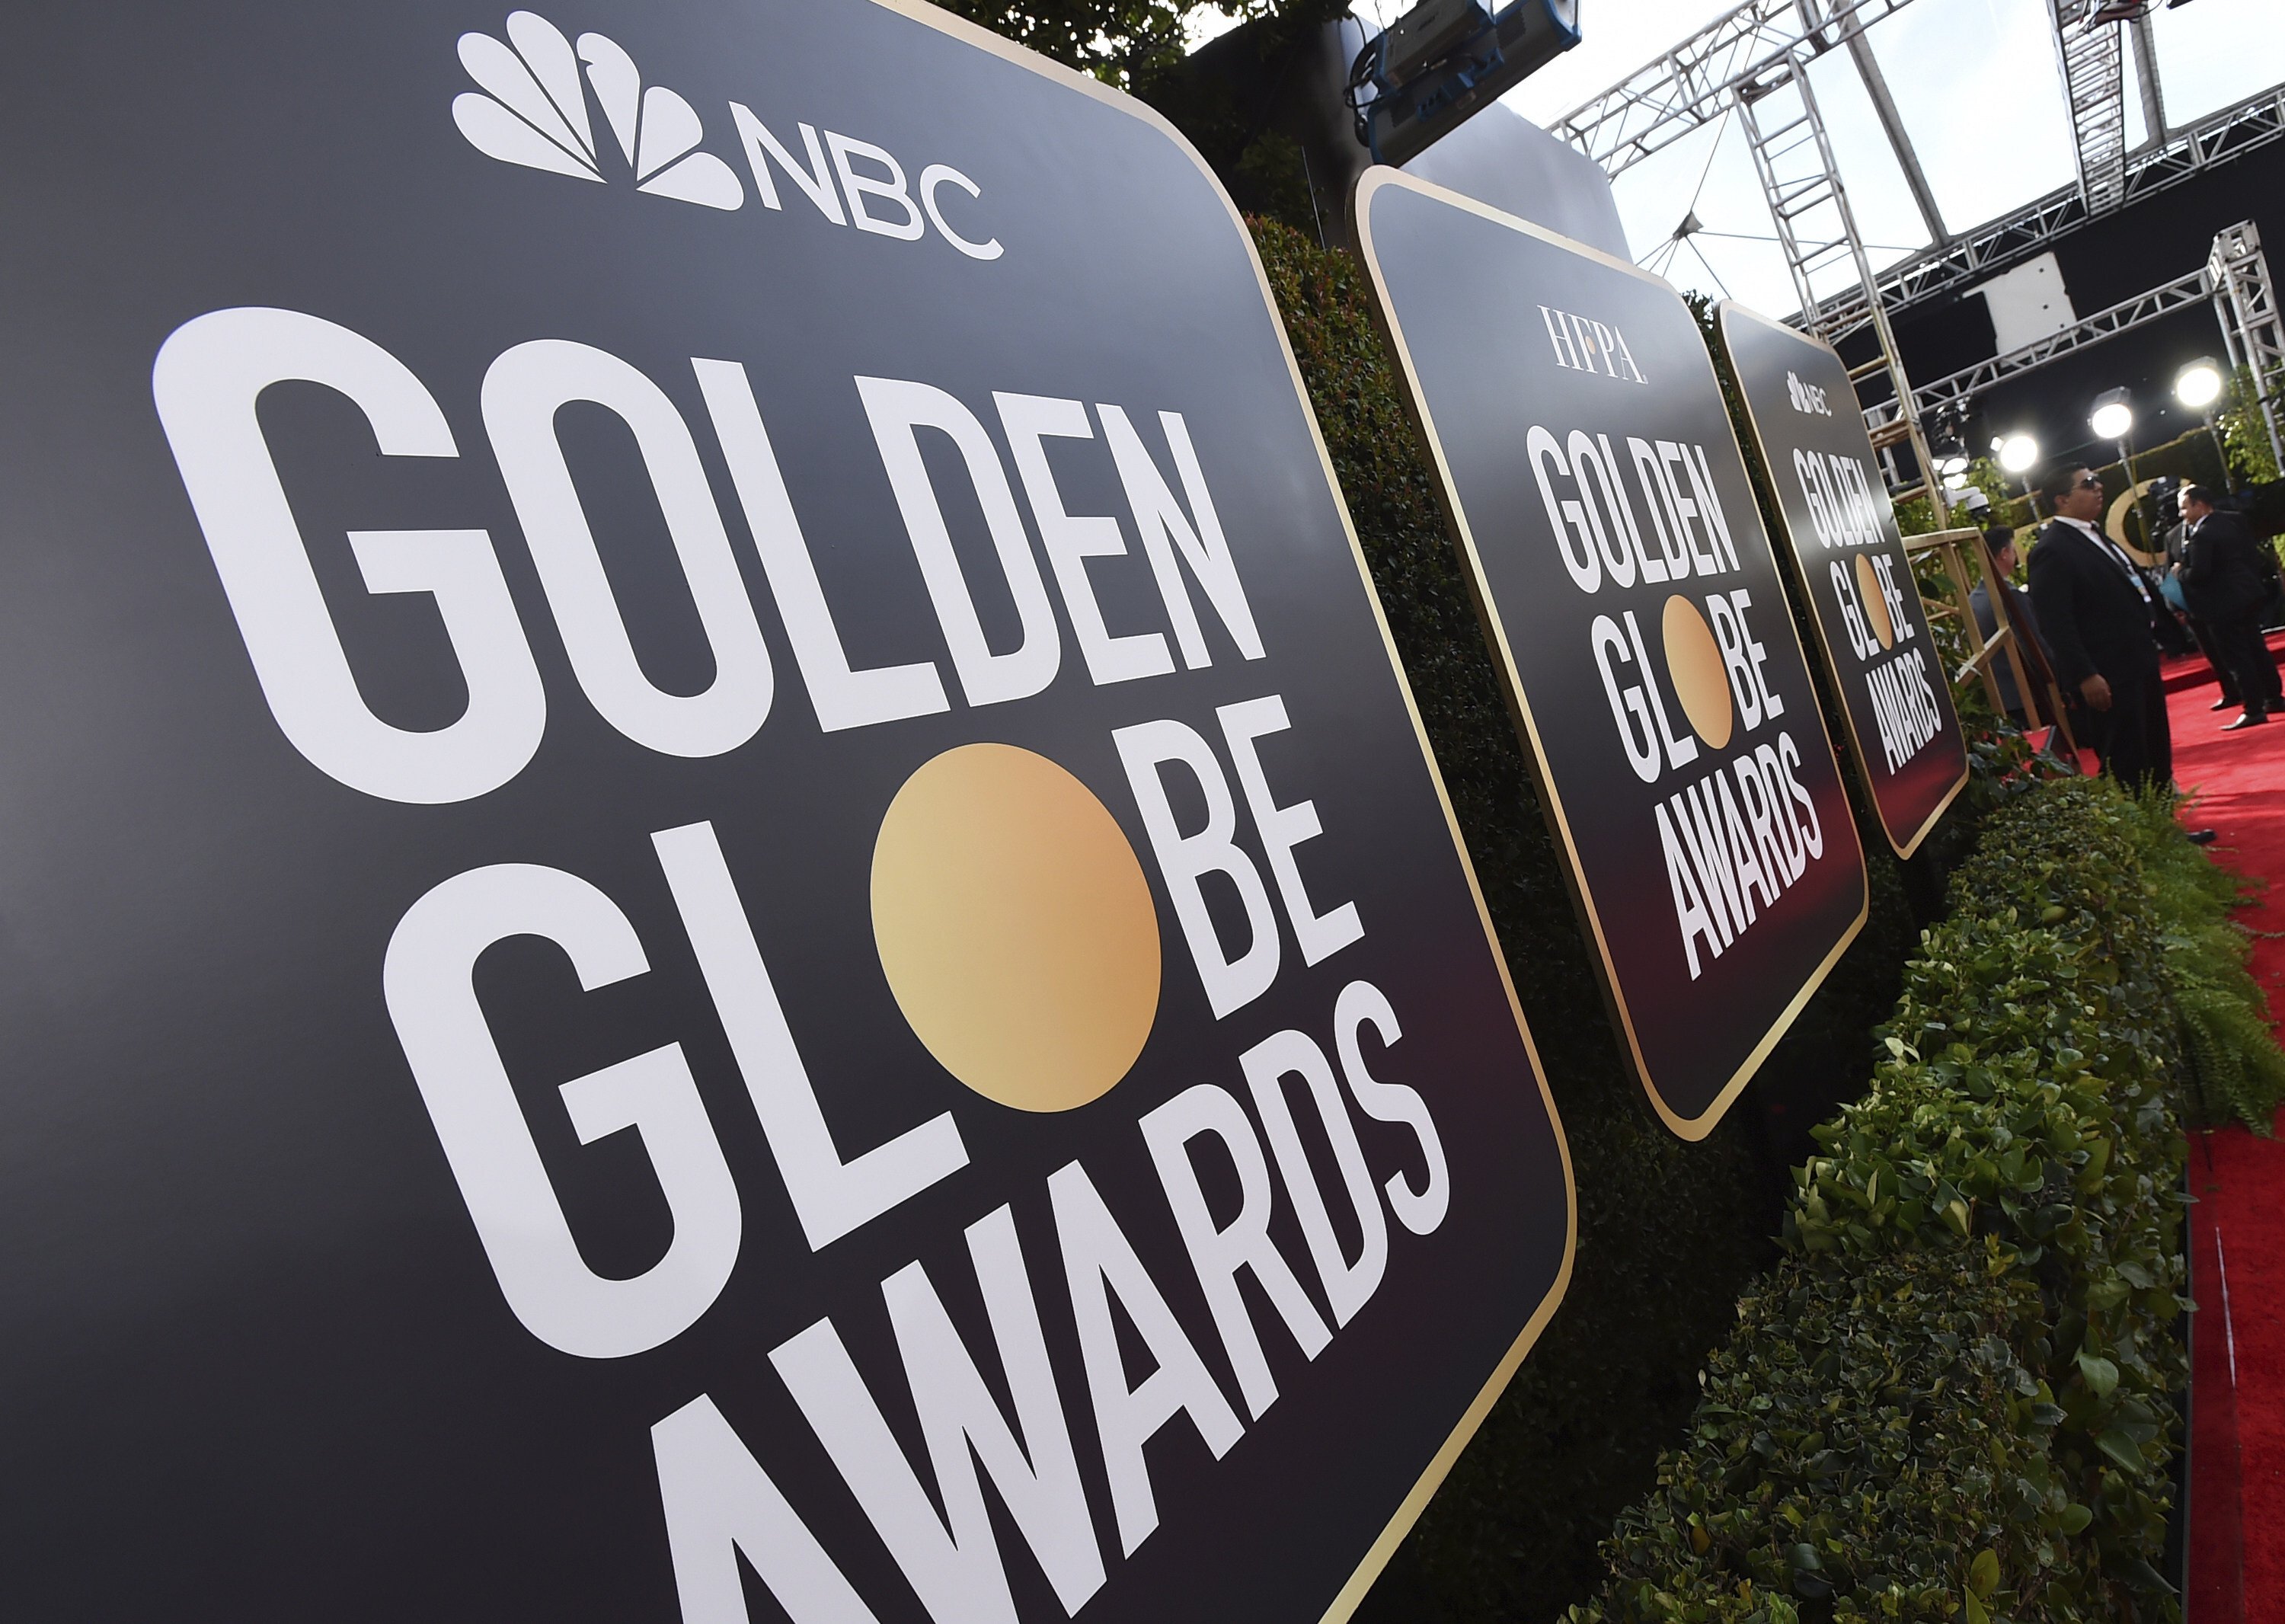 The Golden Globes, hosted in Los Angeles (above) and New York, saw big wins for streaming companies. Nomadland took best picture and its director, China-born Chloé Zhao, best director. Photo: Jordan Strauss/Invision/AP